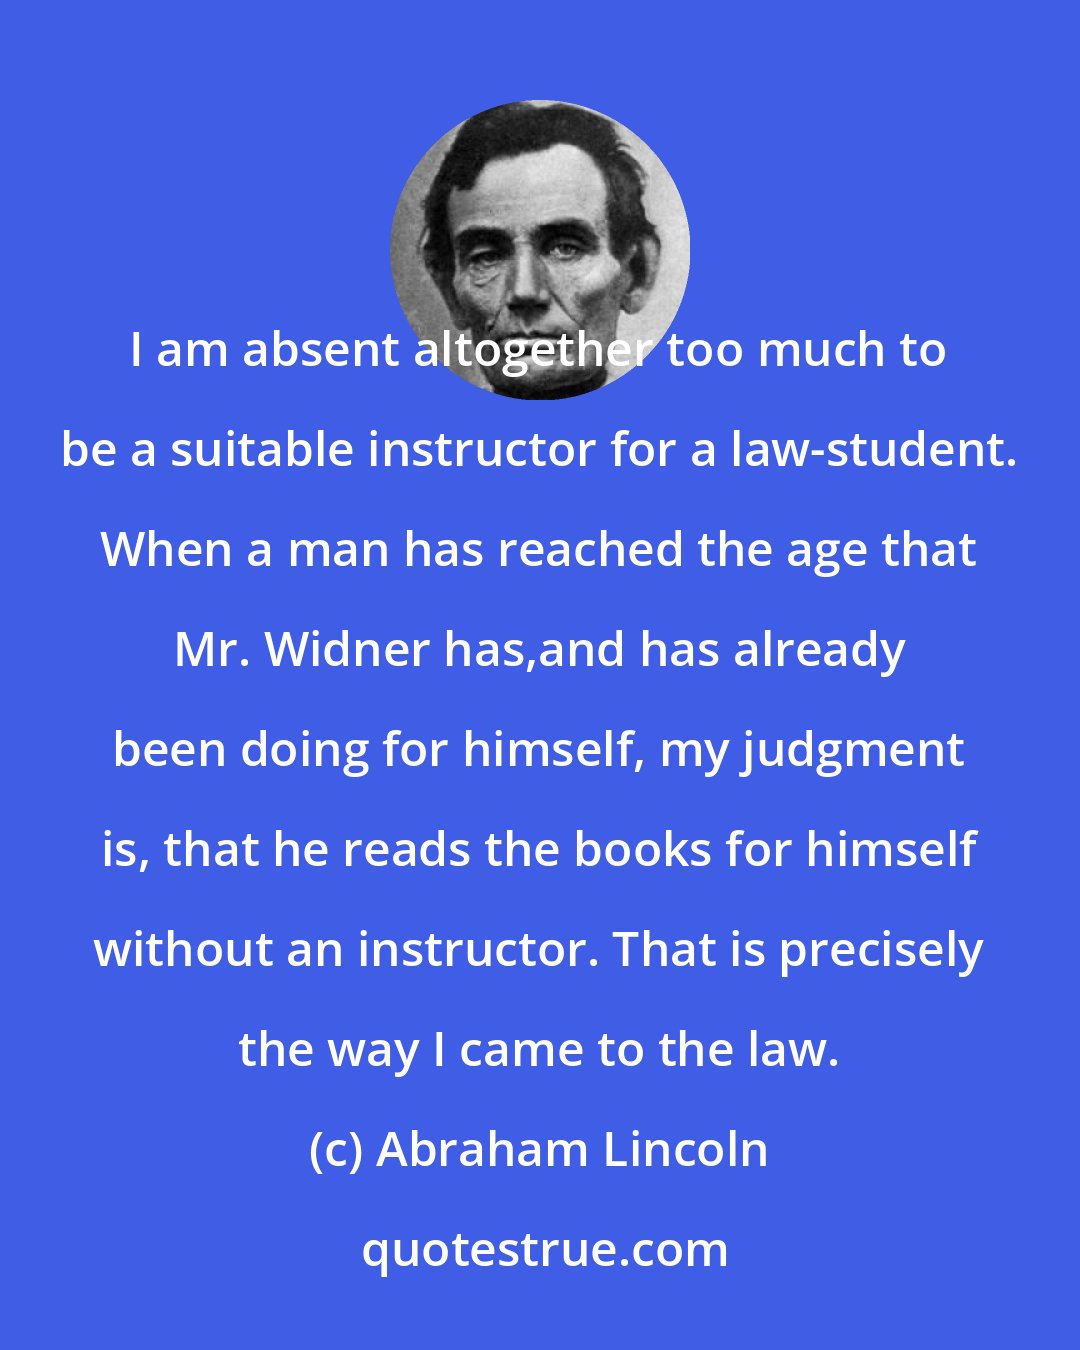 Abraham Lincoln: I am absent altogether too much to be a suitable instructor for a law-student. When a man has reached the age that Mr. Widner has,and has already been doing for himself, my judgment is, that he reads the books for himself without an instructor. That is precisely the way I came to the law.